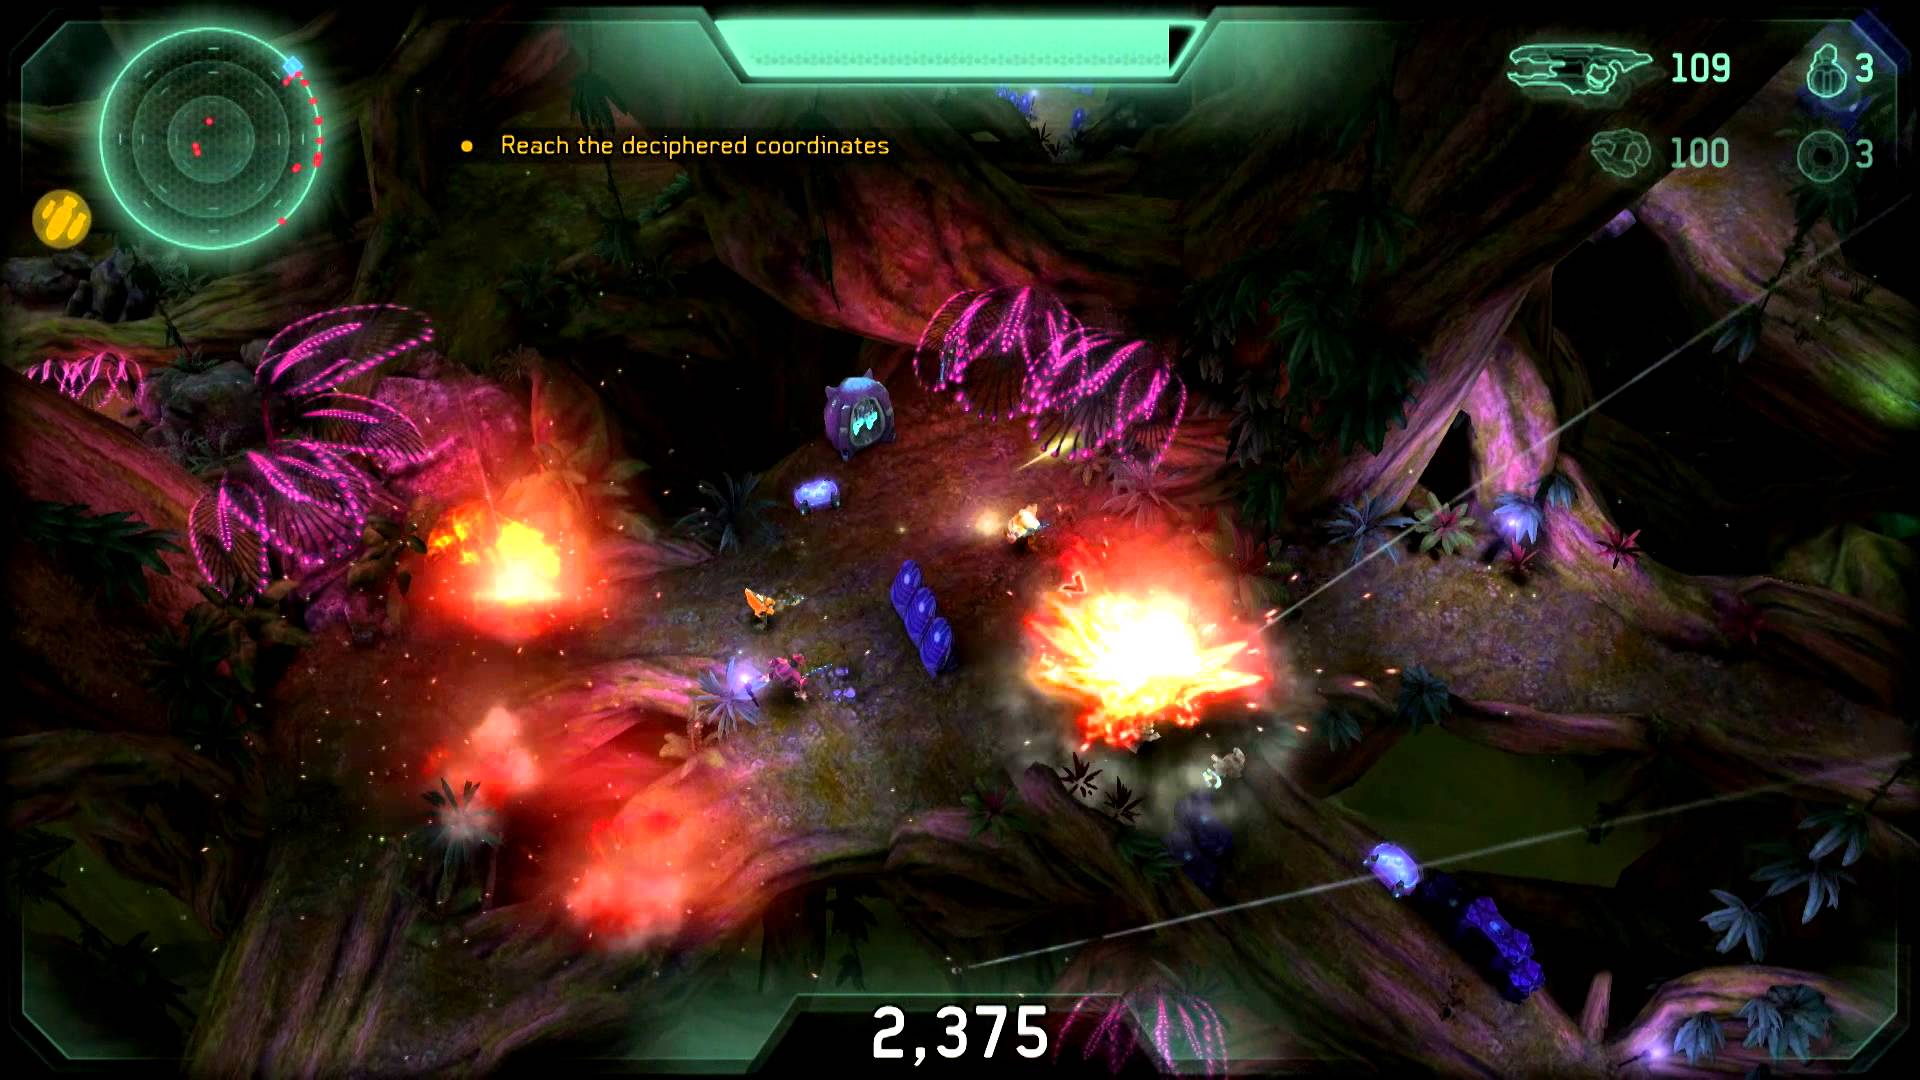 Video For Halo: Spartan Strike Launches Today on Windows 8, Windows Phone 8, iPhone, iPad and Steam